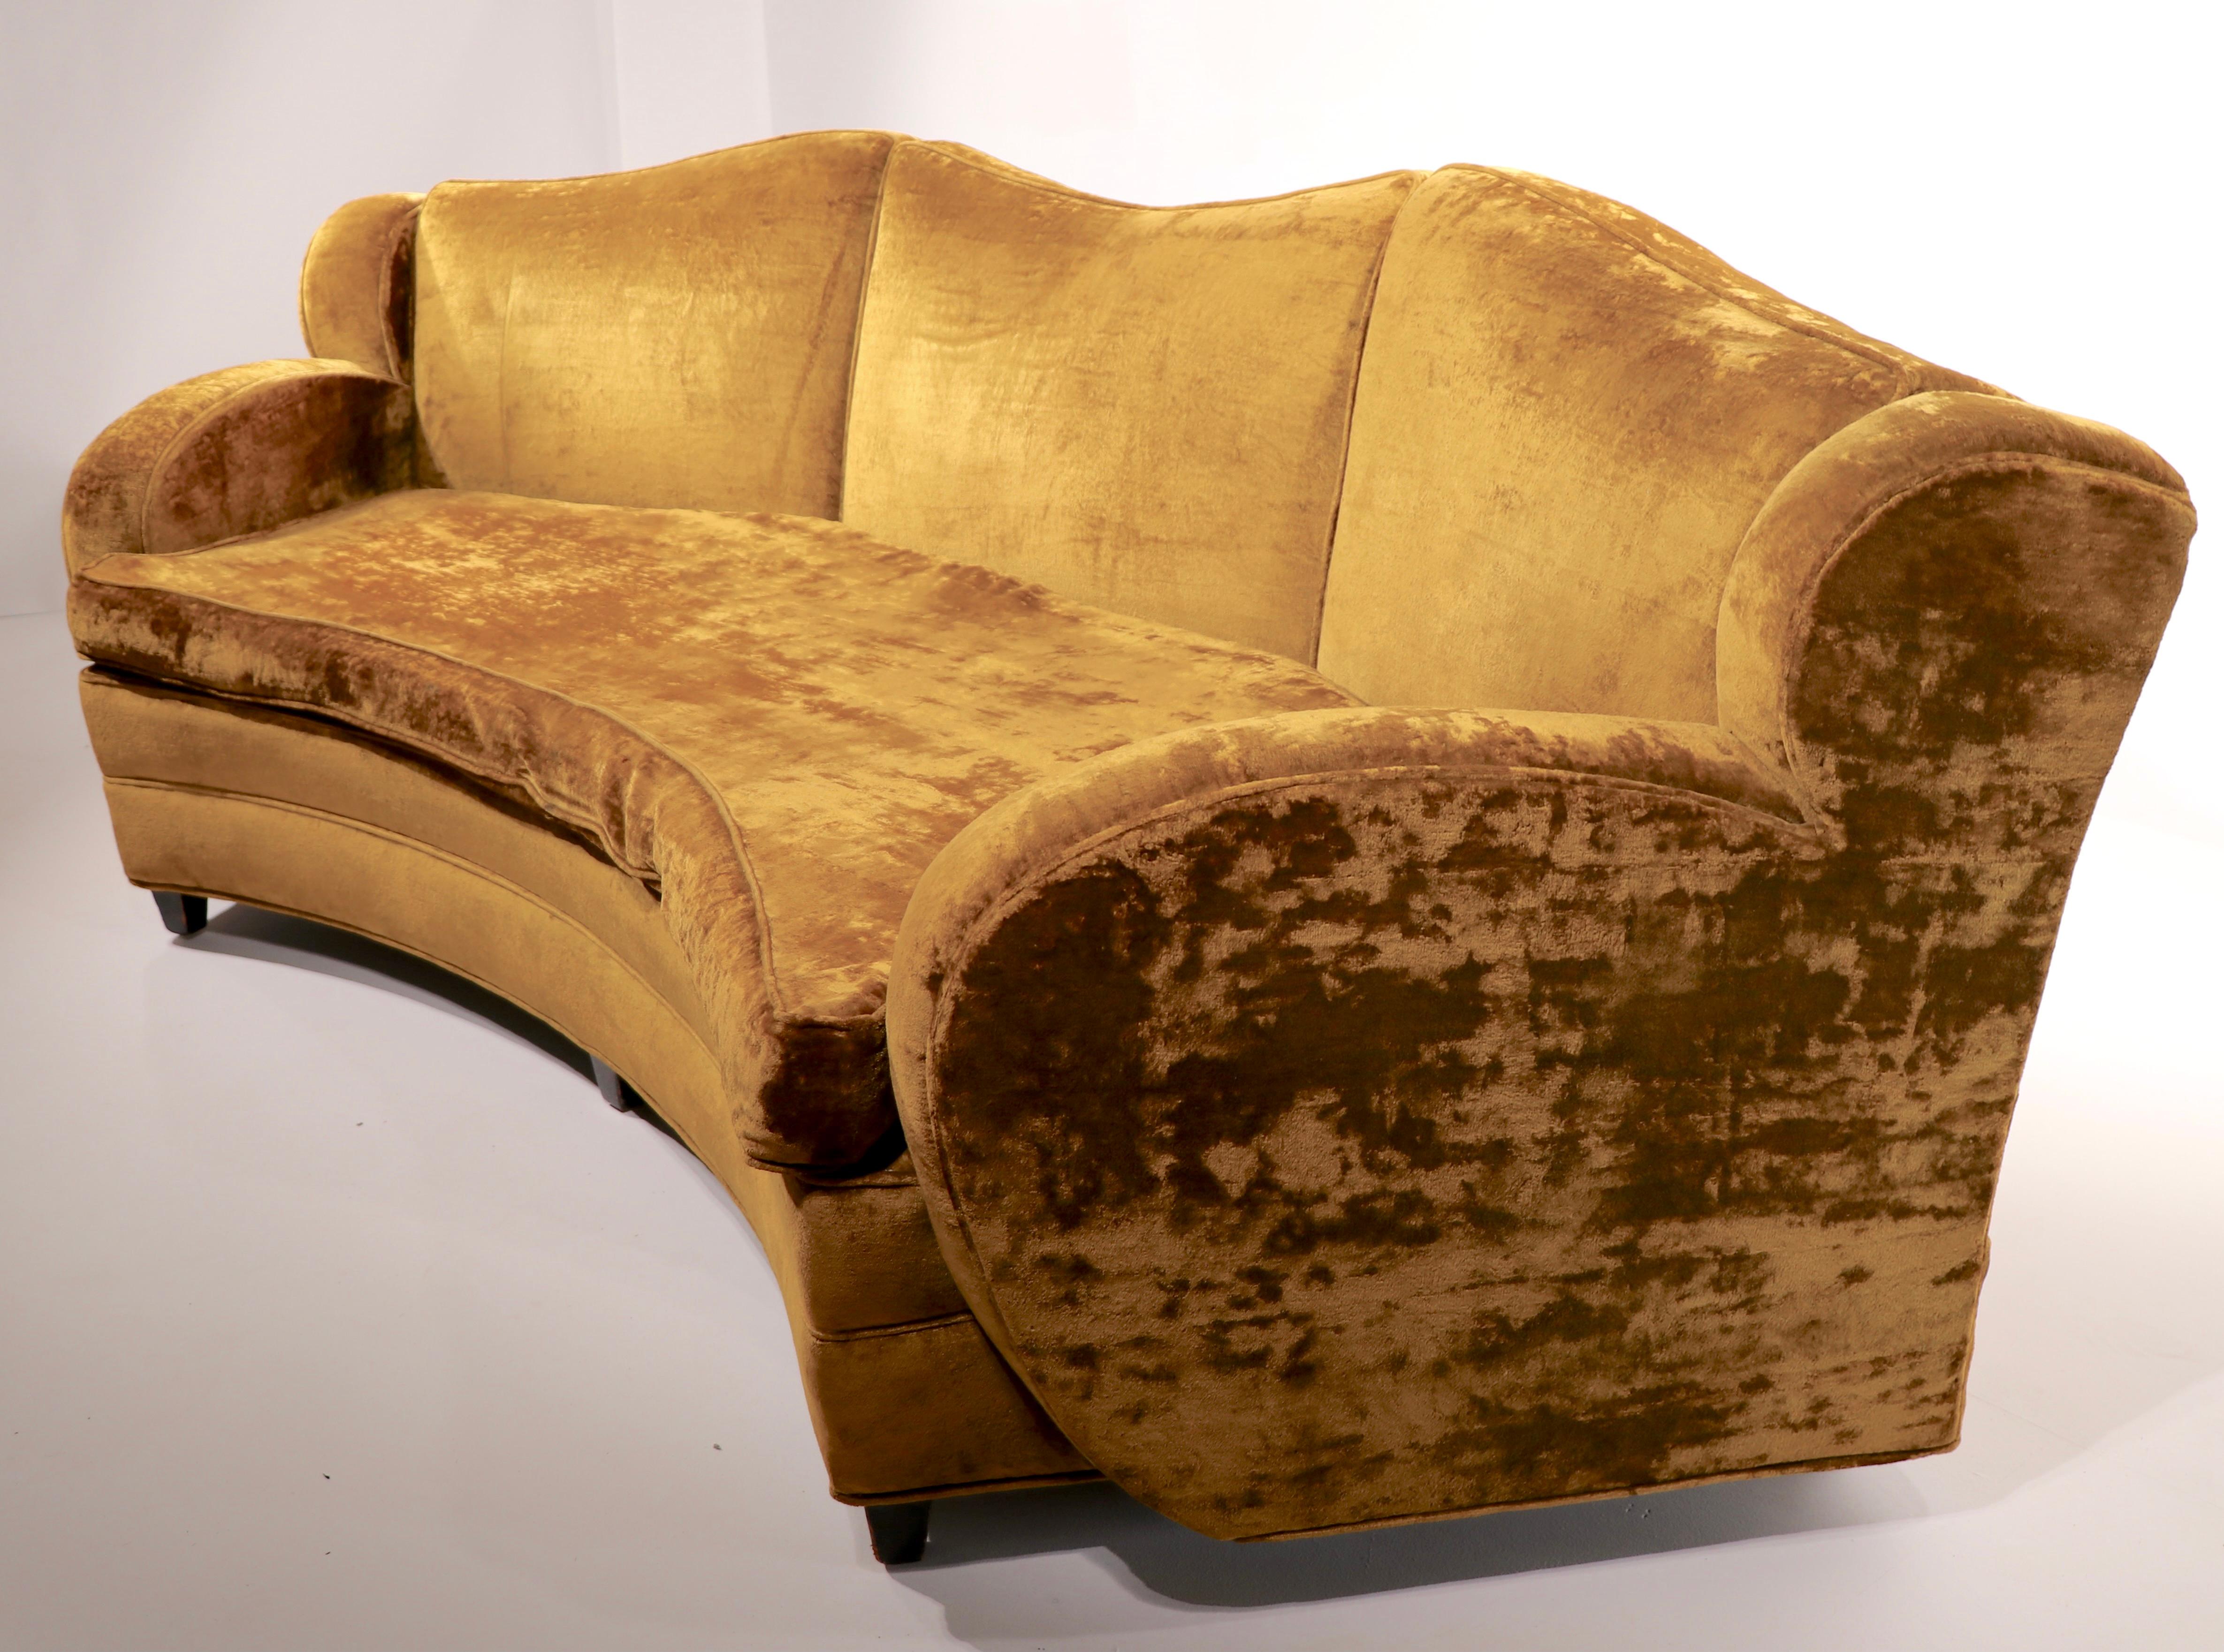 Totally Glam Hollywood Regency, Art Deco sofa. Top quality construction, tied spring upholstery, solid wood frame. structurally sound, and sturdy, fabric is worn, and will need to be replaced ( reupholstered ). Semi circular curved shape adds to the